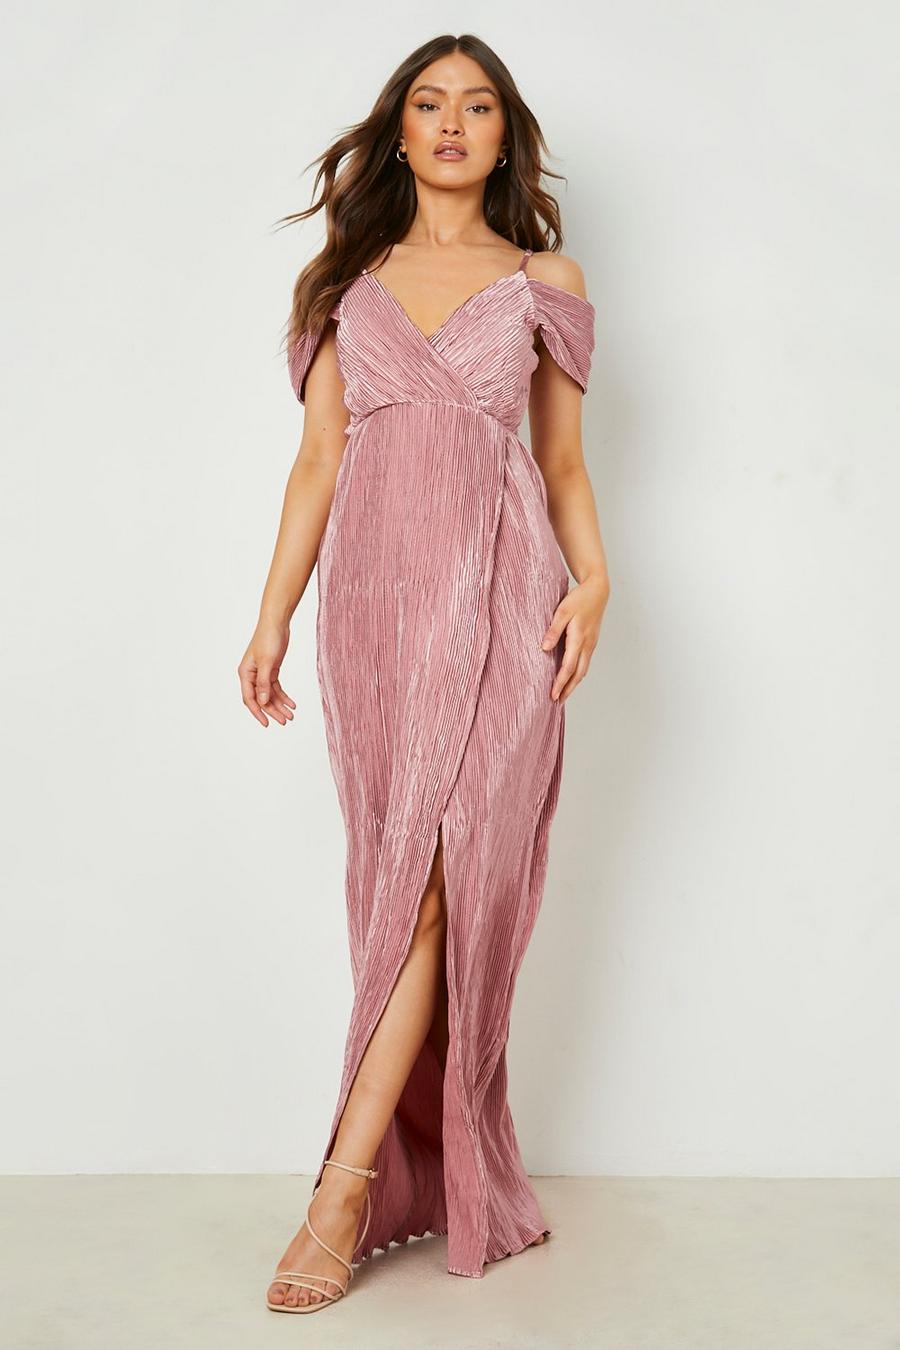 Blush pink Channels Vintage Glamour in a Feathered Dress & Glittering Sandals on the Red Carpet